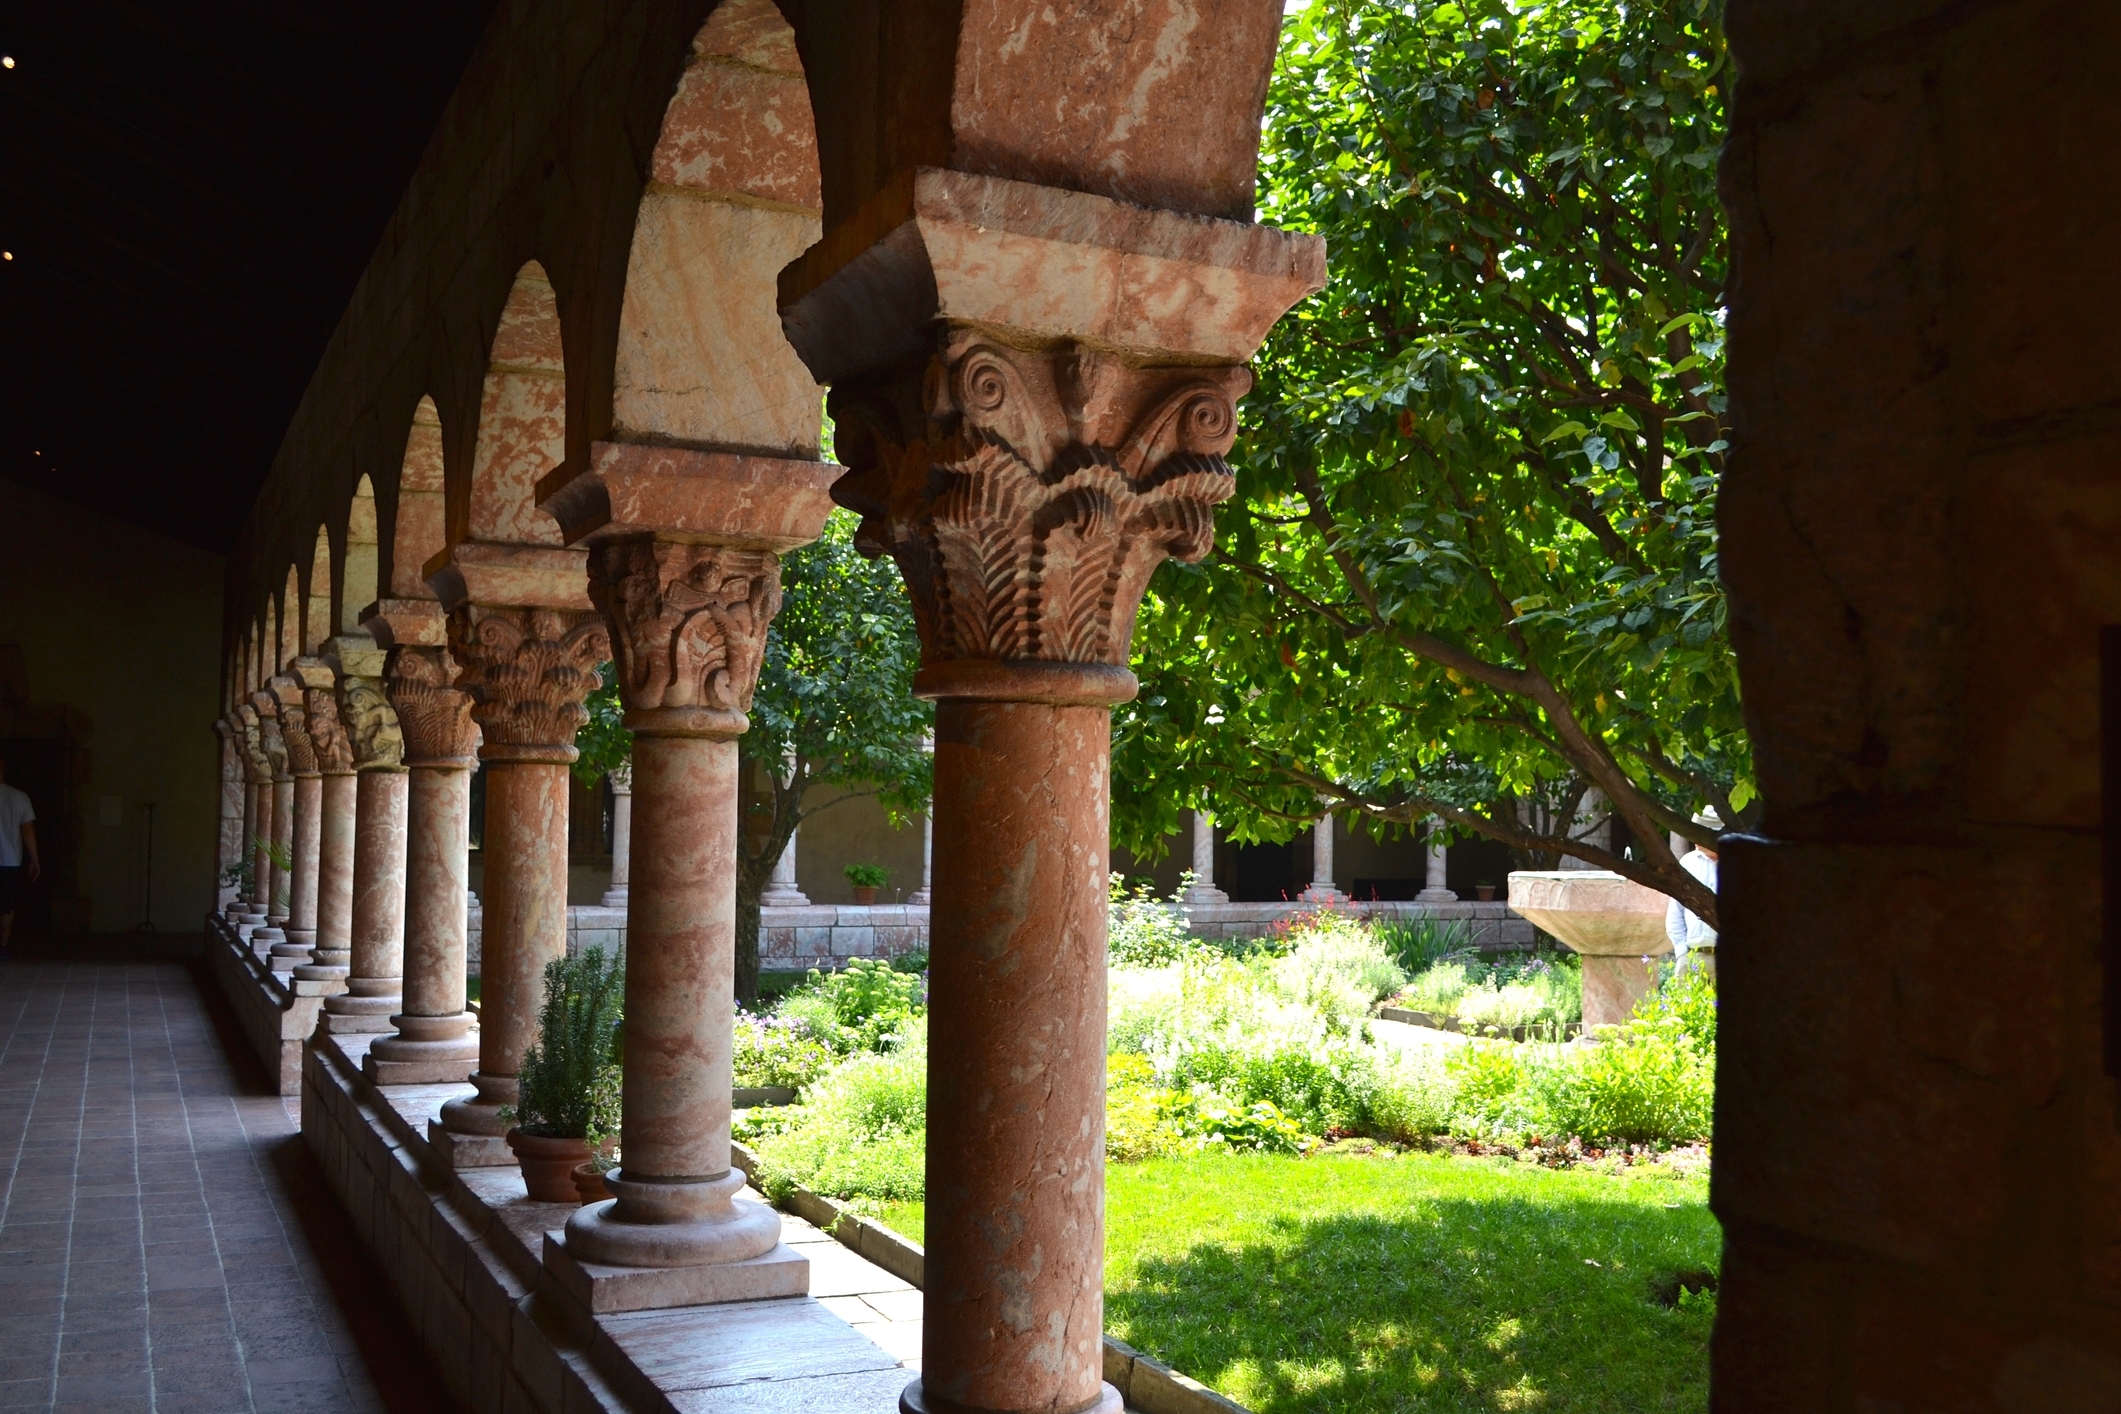 A view of the garden at The Cloisters museum in NYC.